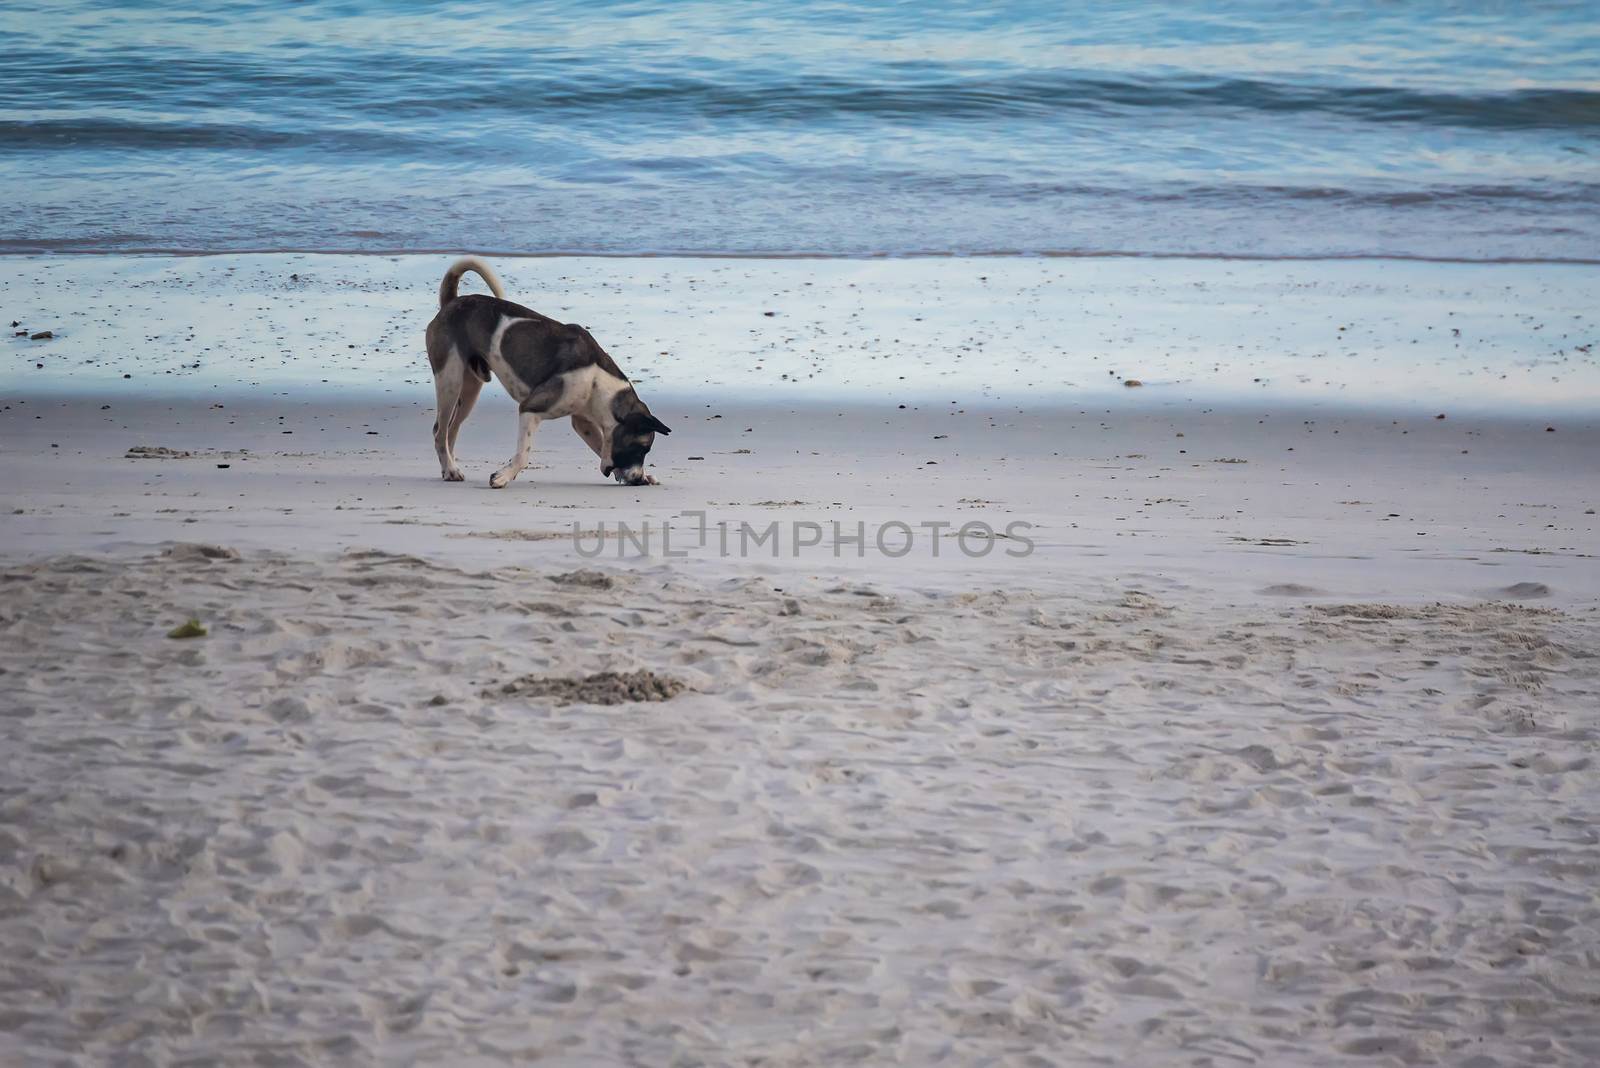 Homeless dogs on the beach by Bubbers